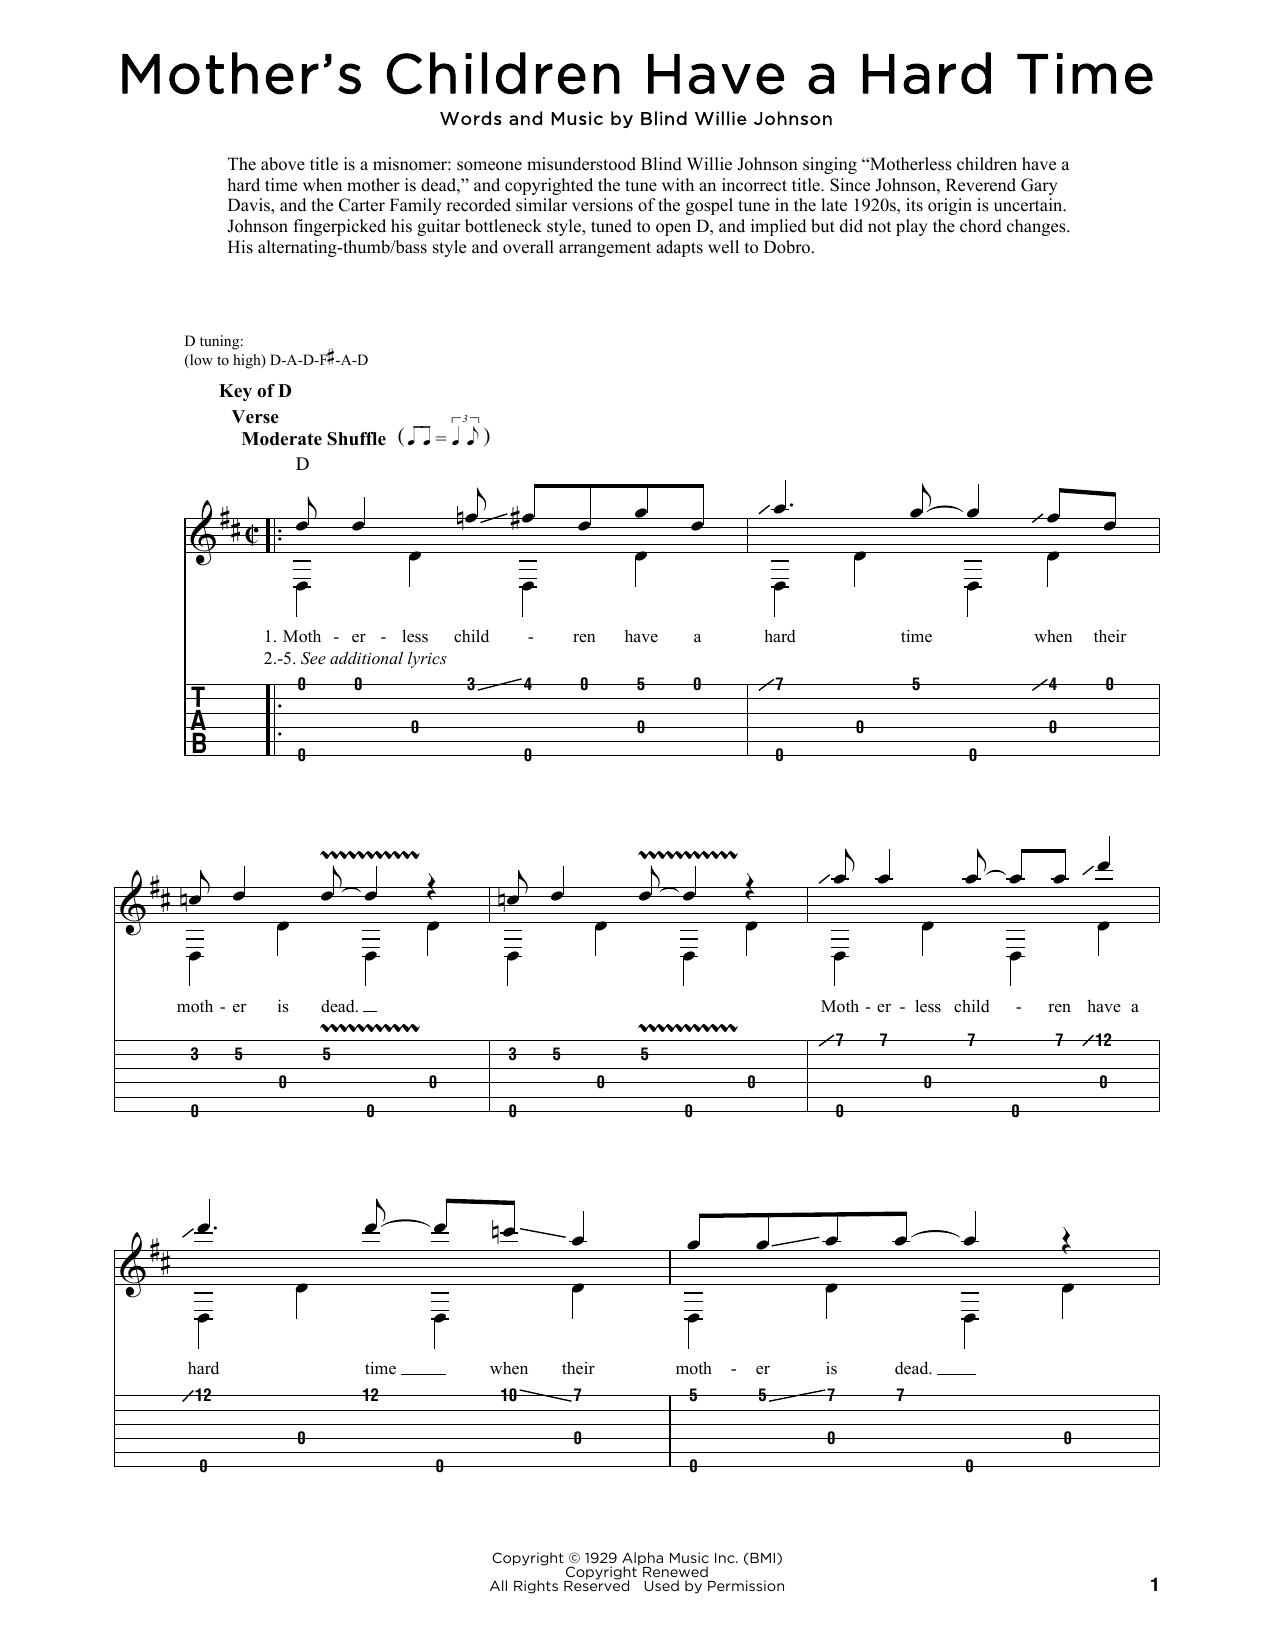 Download Blind Willie Johnson Mother's Children Have A Hard Time Sheet Music